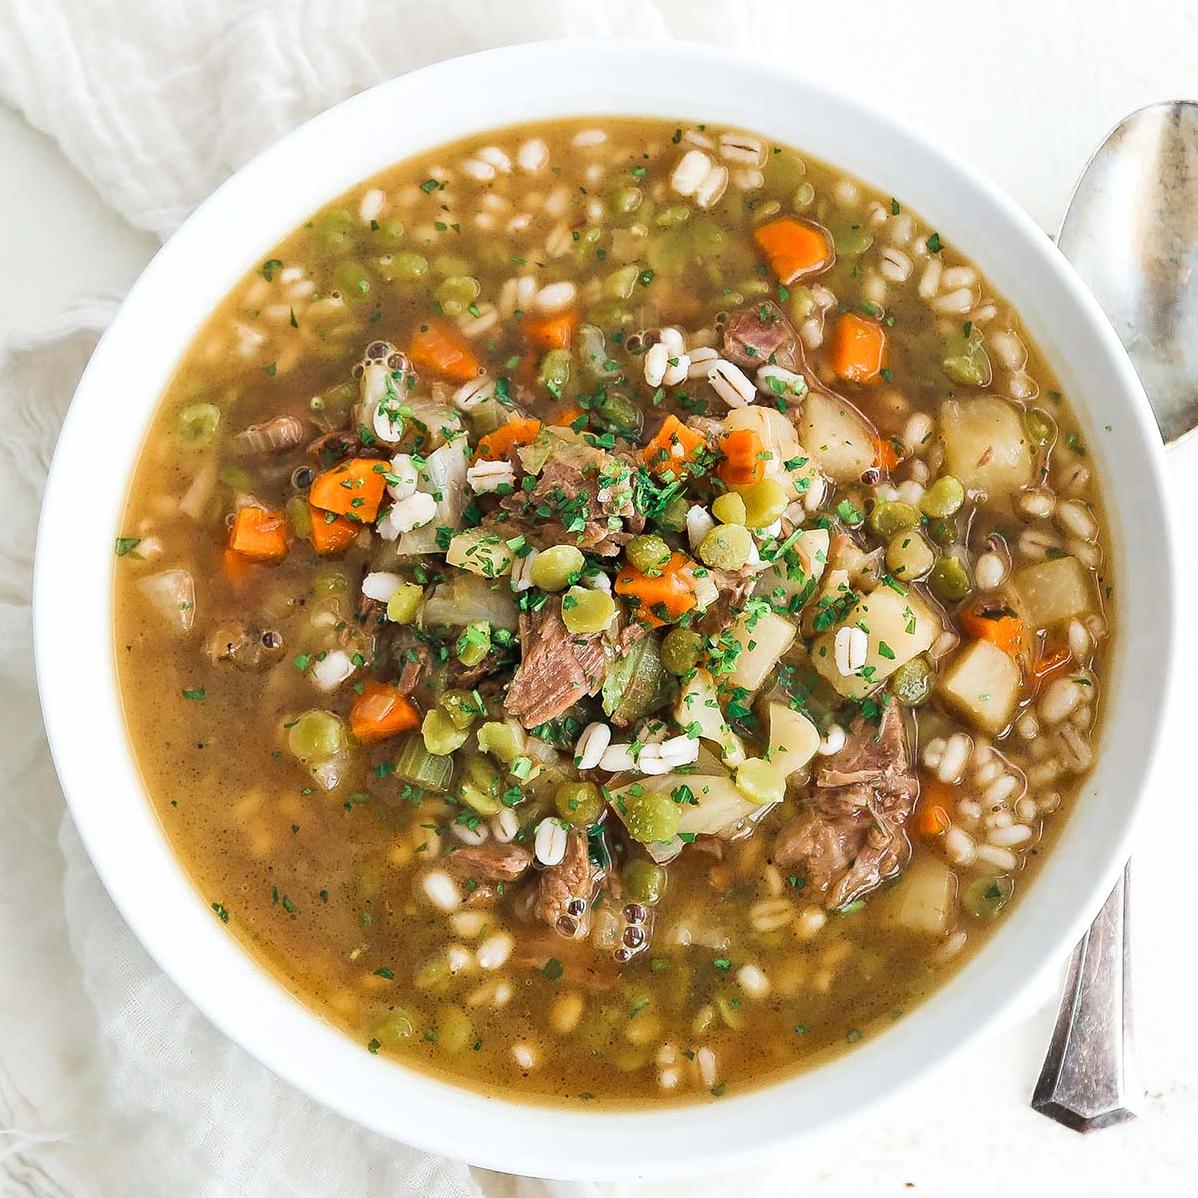  A soup that will warm your soul and fill your belly.